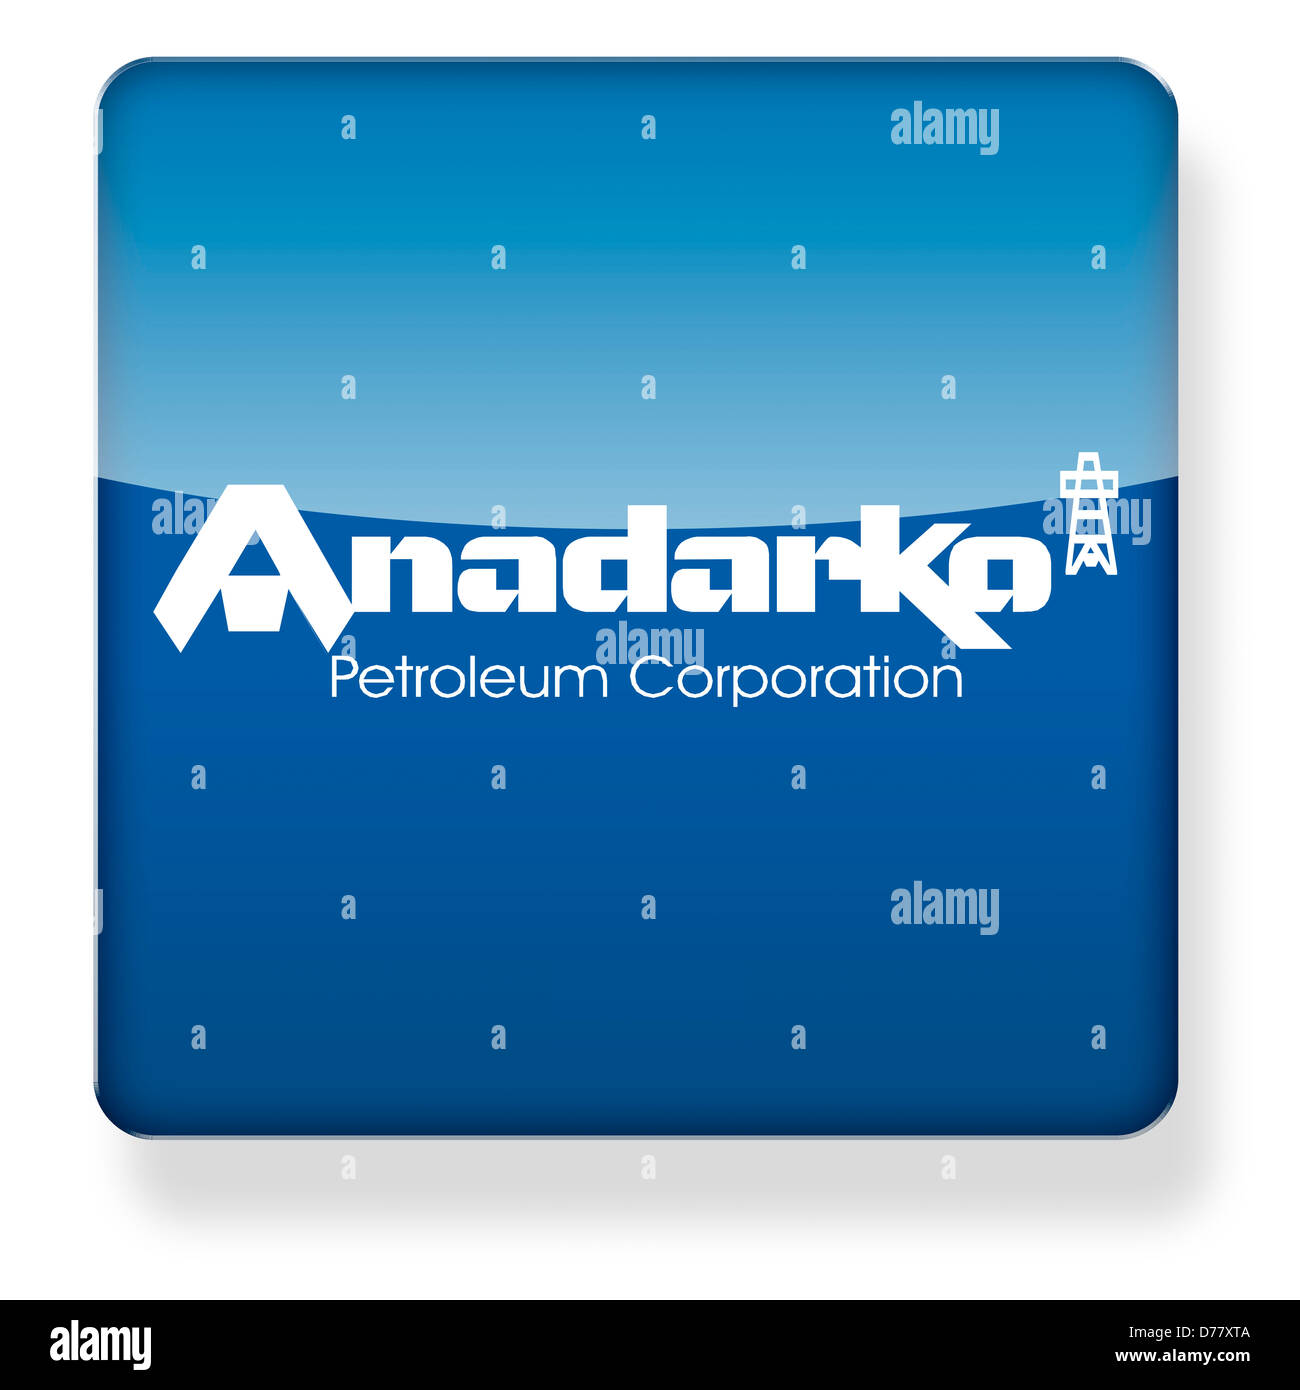 Anadarko Petroleum Corporation logo as an app icon. Clipping path included. Stock Photo